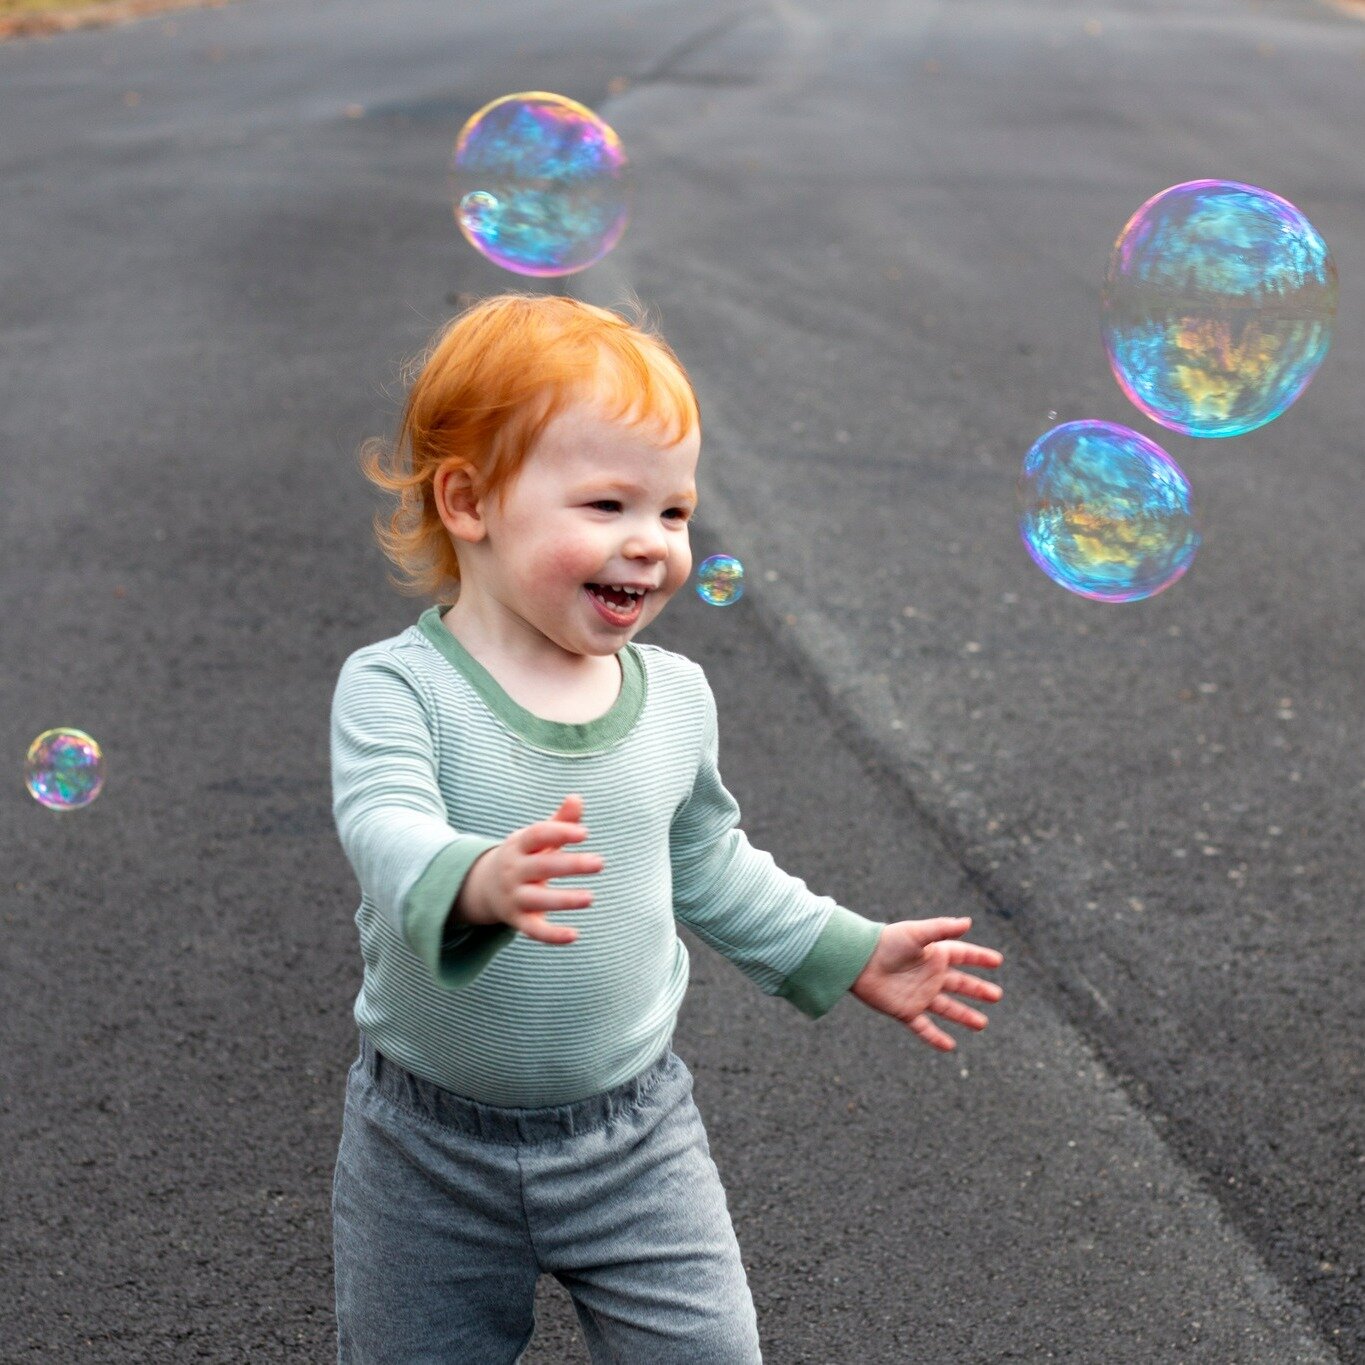 I'm looking for 2-3 kiddos ages 2-7 that LOVE bubbles for a fun bubble party session to create some unforgettable smiles! Must be available one day from April 2-4! DM me for details!

#momentswithmegan #lovewhatido #BoutiquePhotography #LoveInTheLens